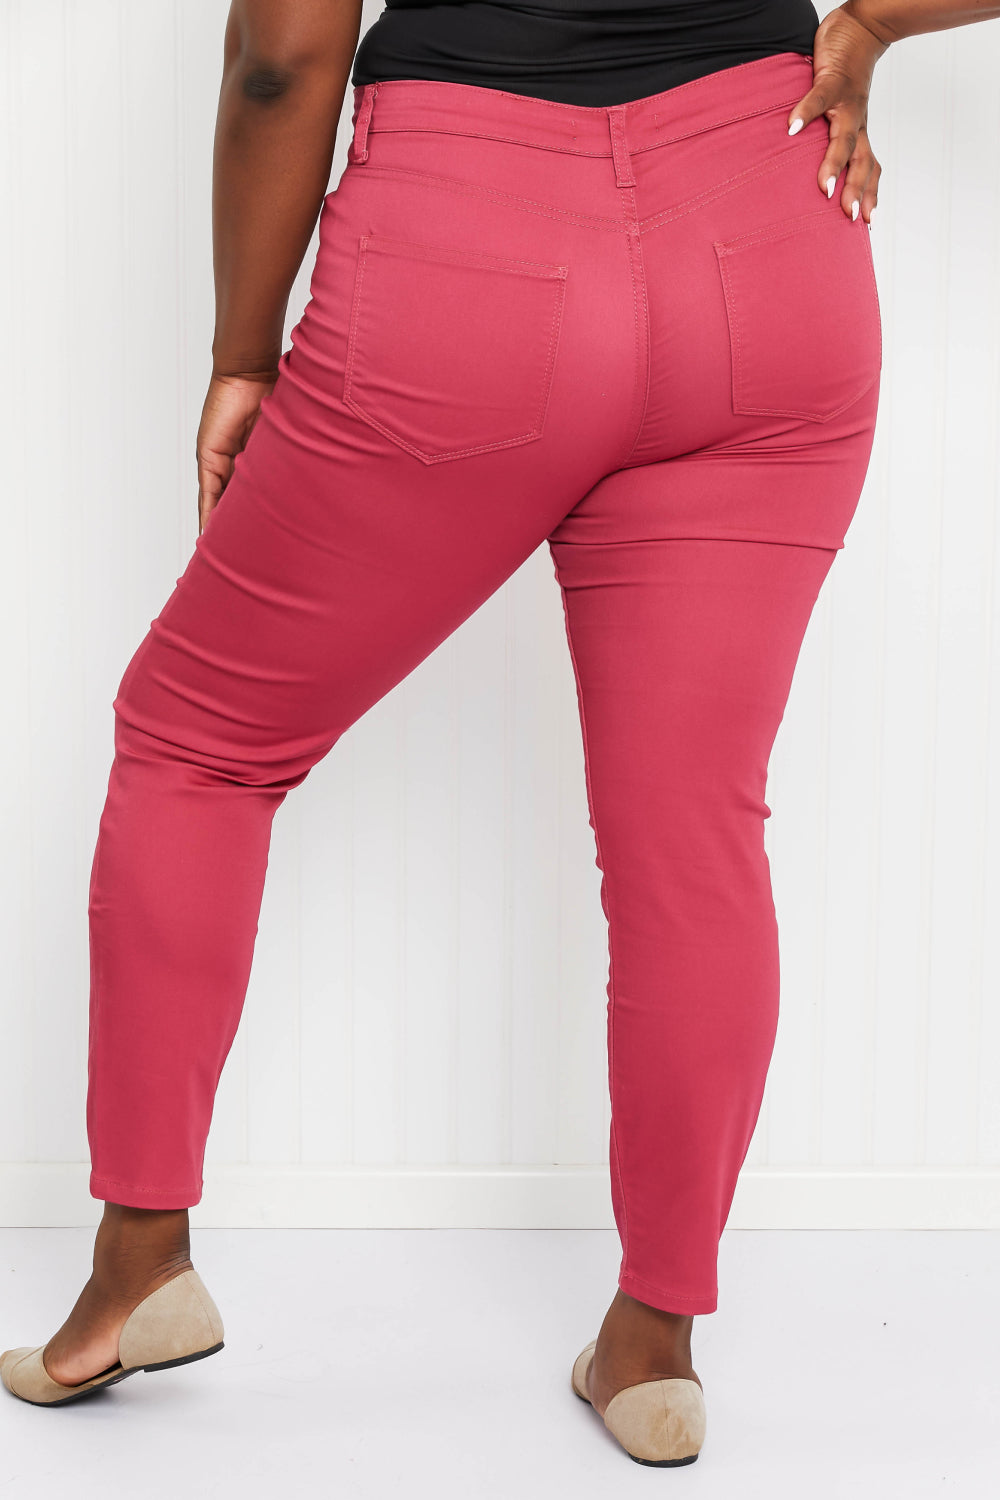 Walk the Line High Rise Skinny Jeans in Rose